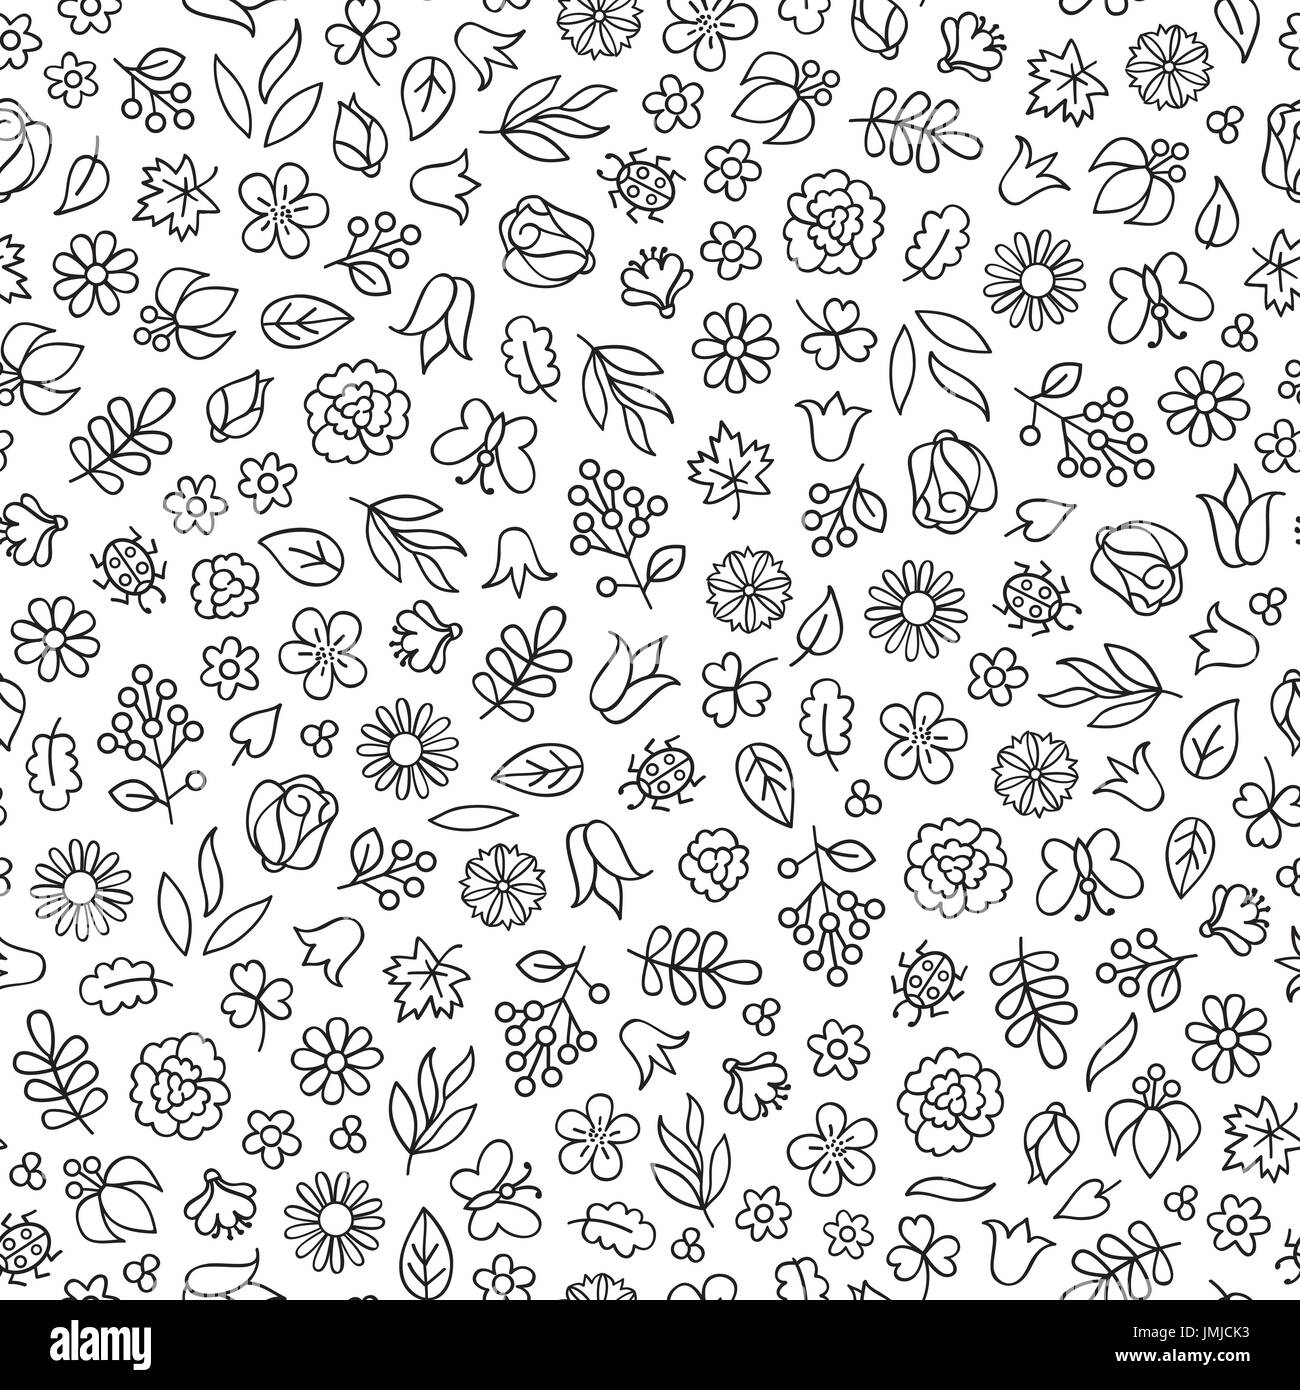 https://c8.alamy.com/comp/JMJCK3/flower-icon-seamless-pattern-floral-leaves-and-flowers-white-texture-JMJCK3.jpg